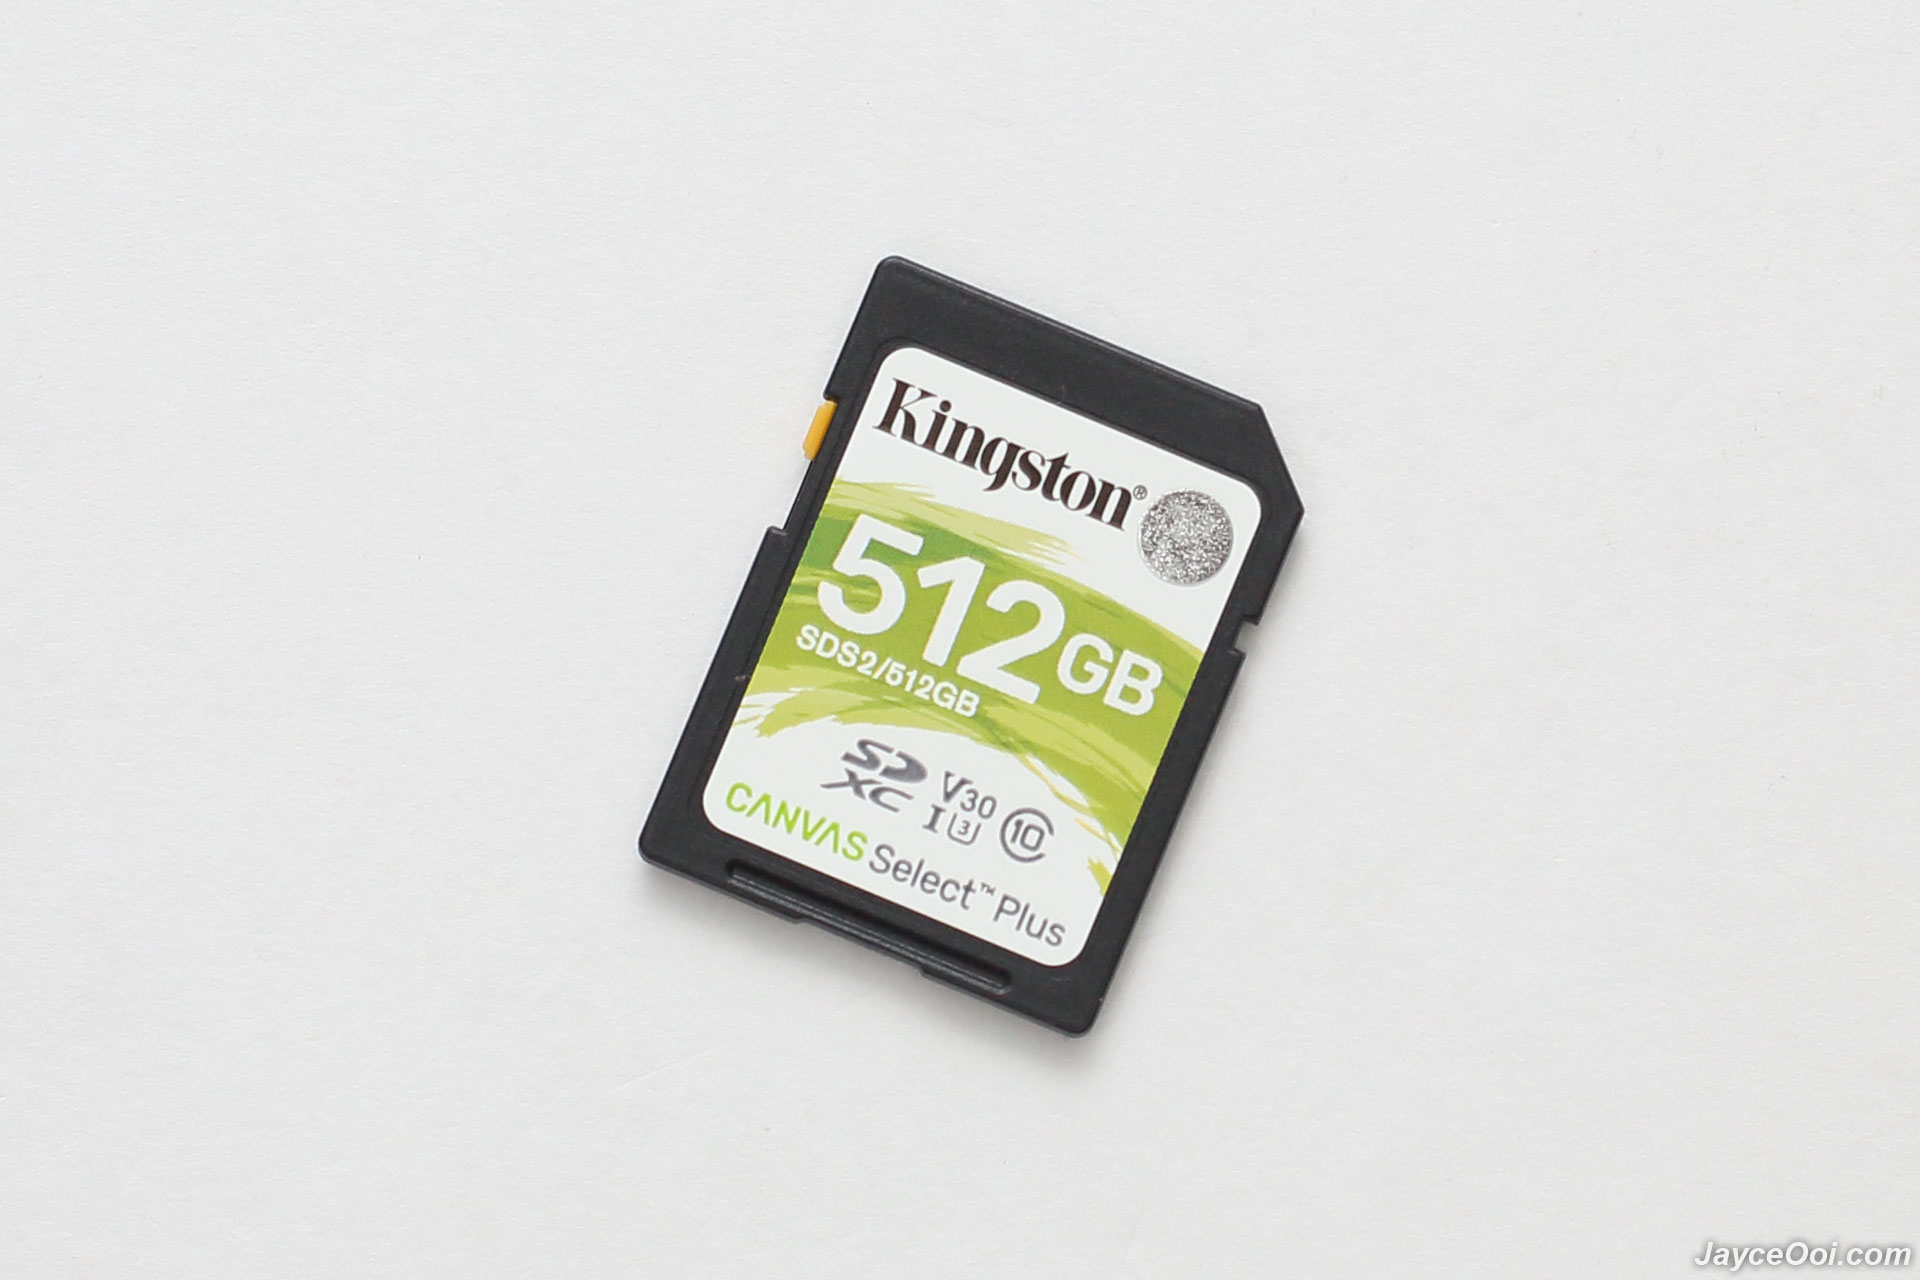 Kingston 512GB Asus ZenFone Max Plus MicroSDXC Canvas Select Plus Card Verified by SanFlash. 100MBs Works with Kingston